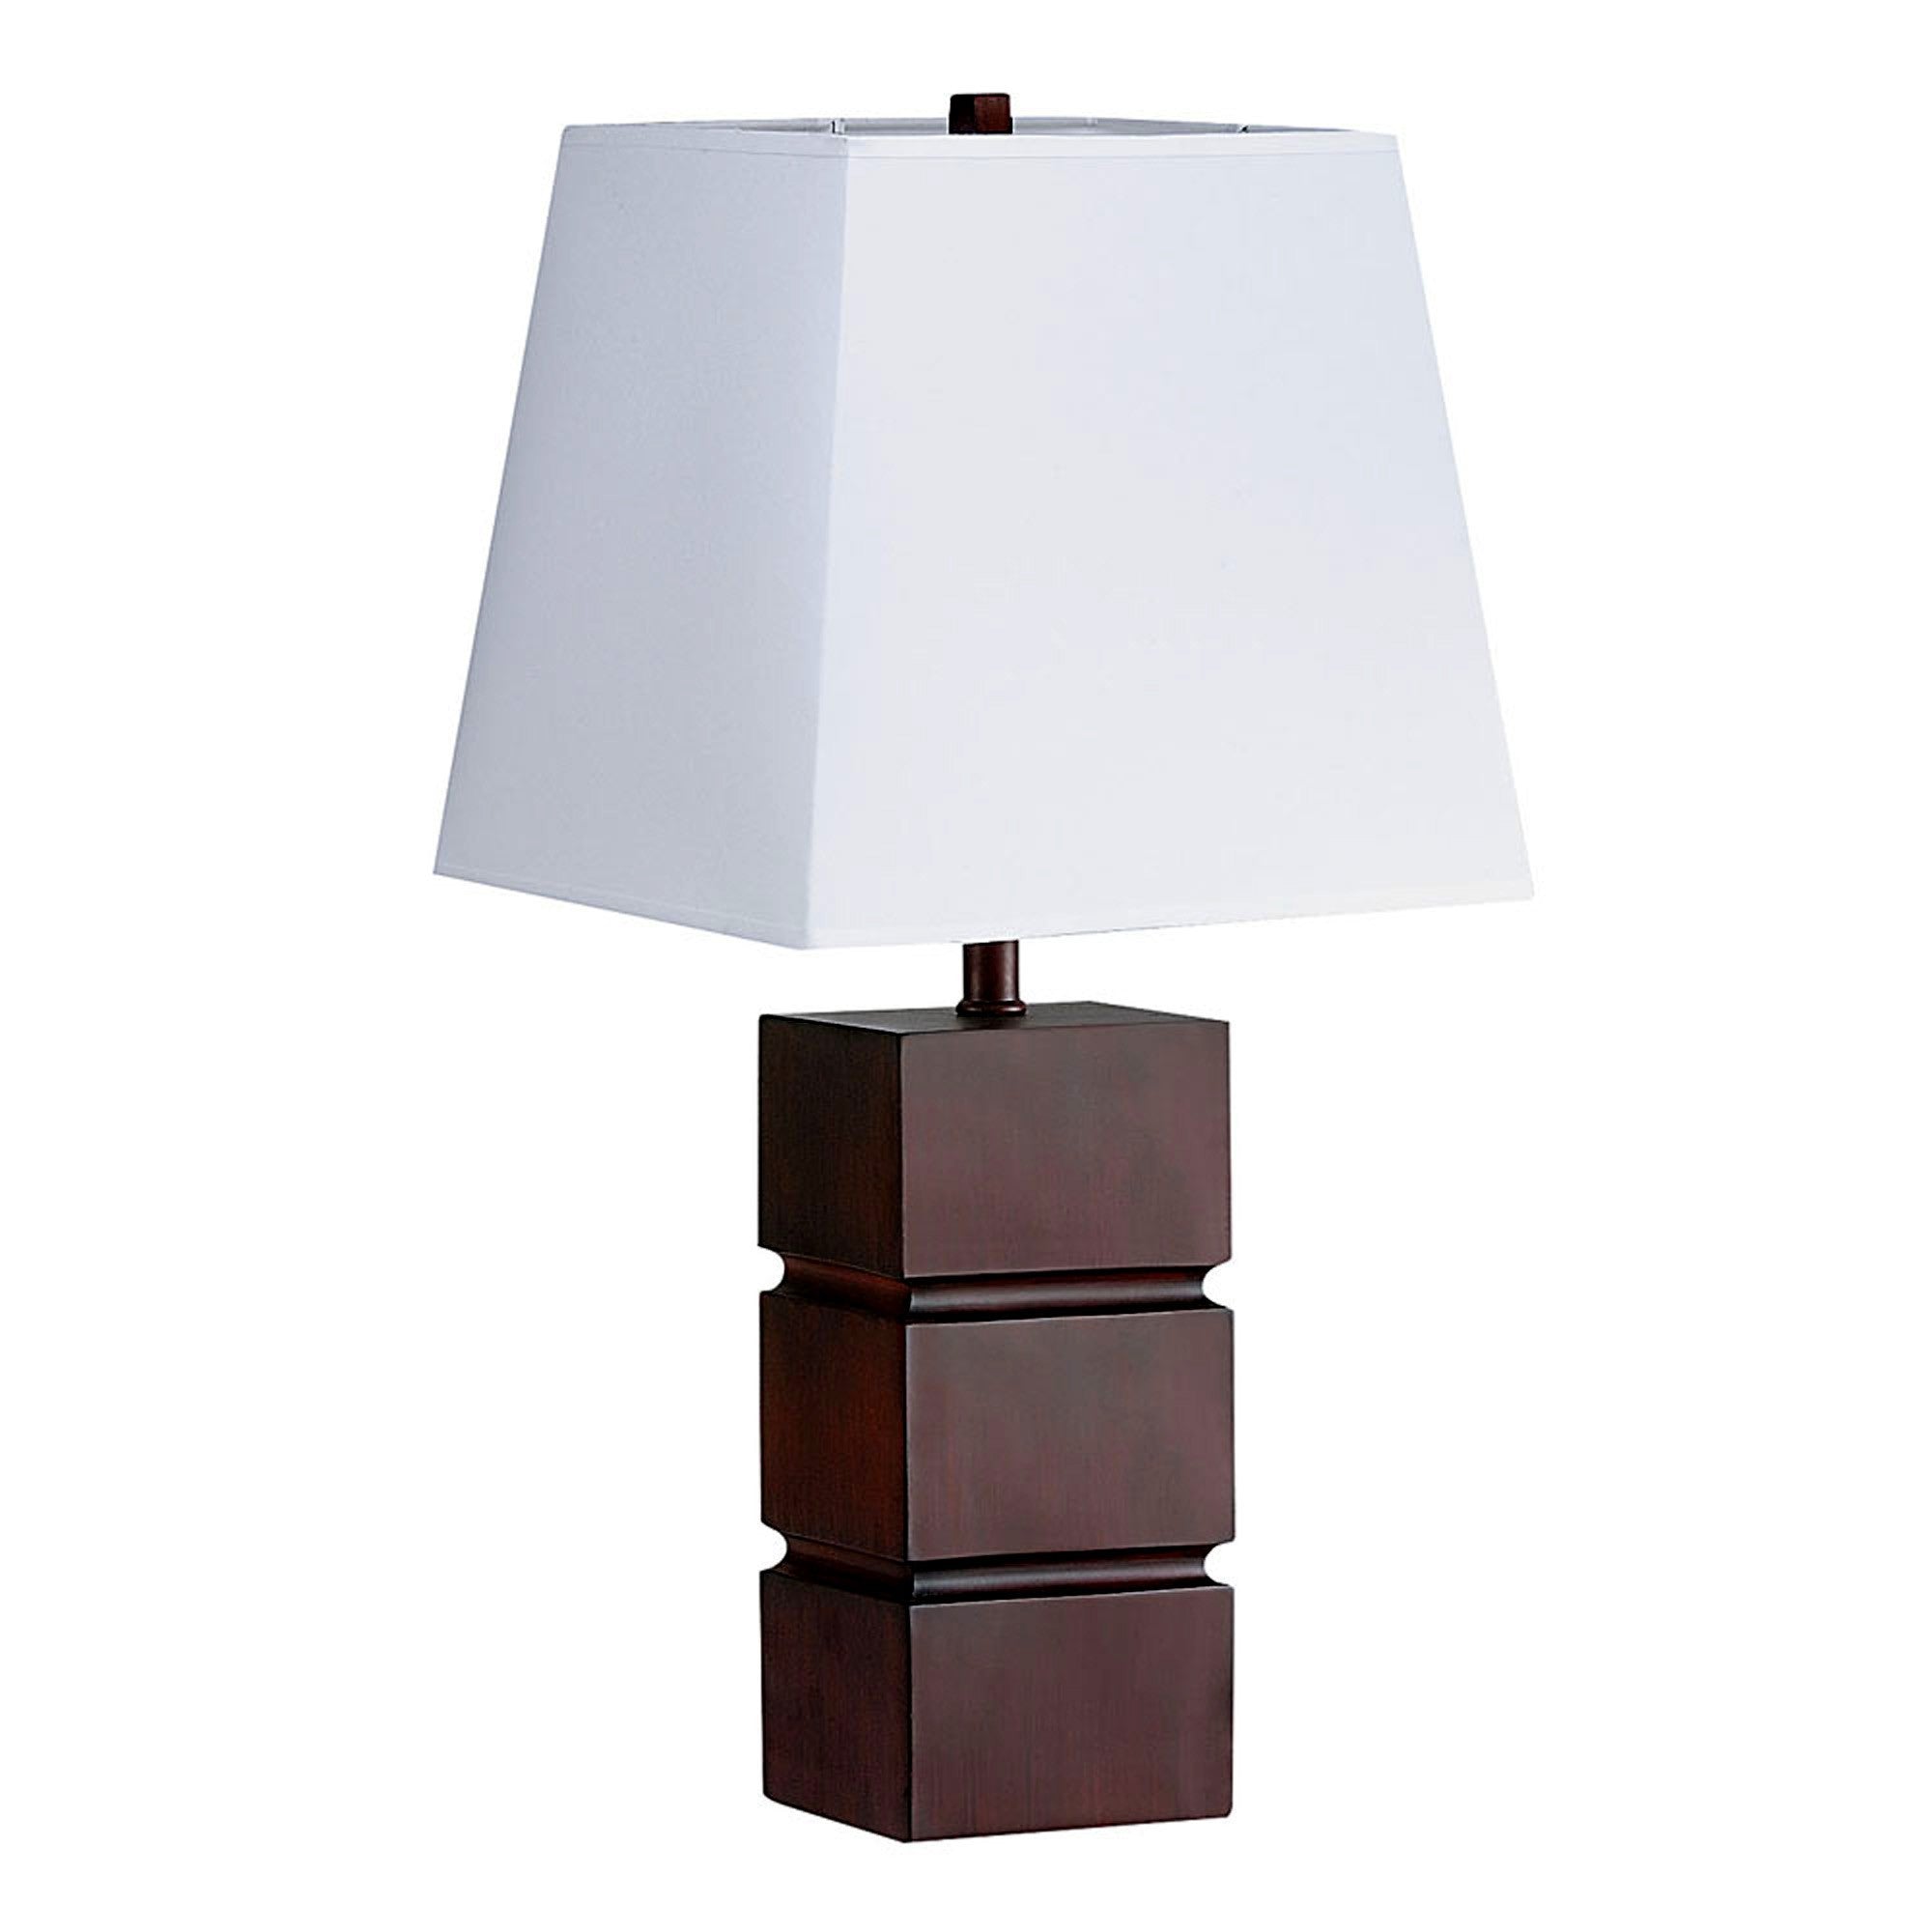 27" Brown Bedside Table Lamp With White Shade